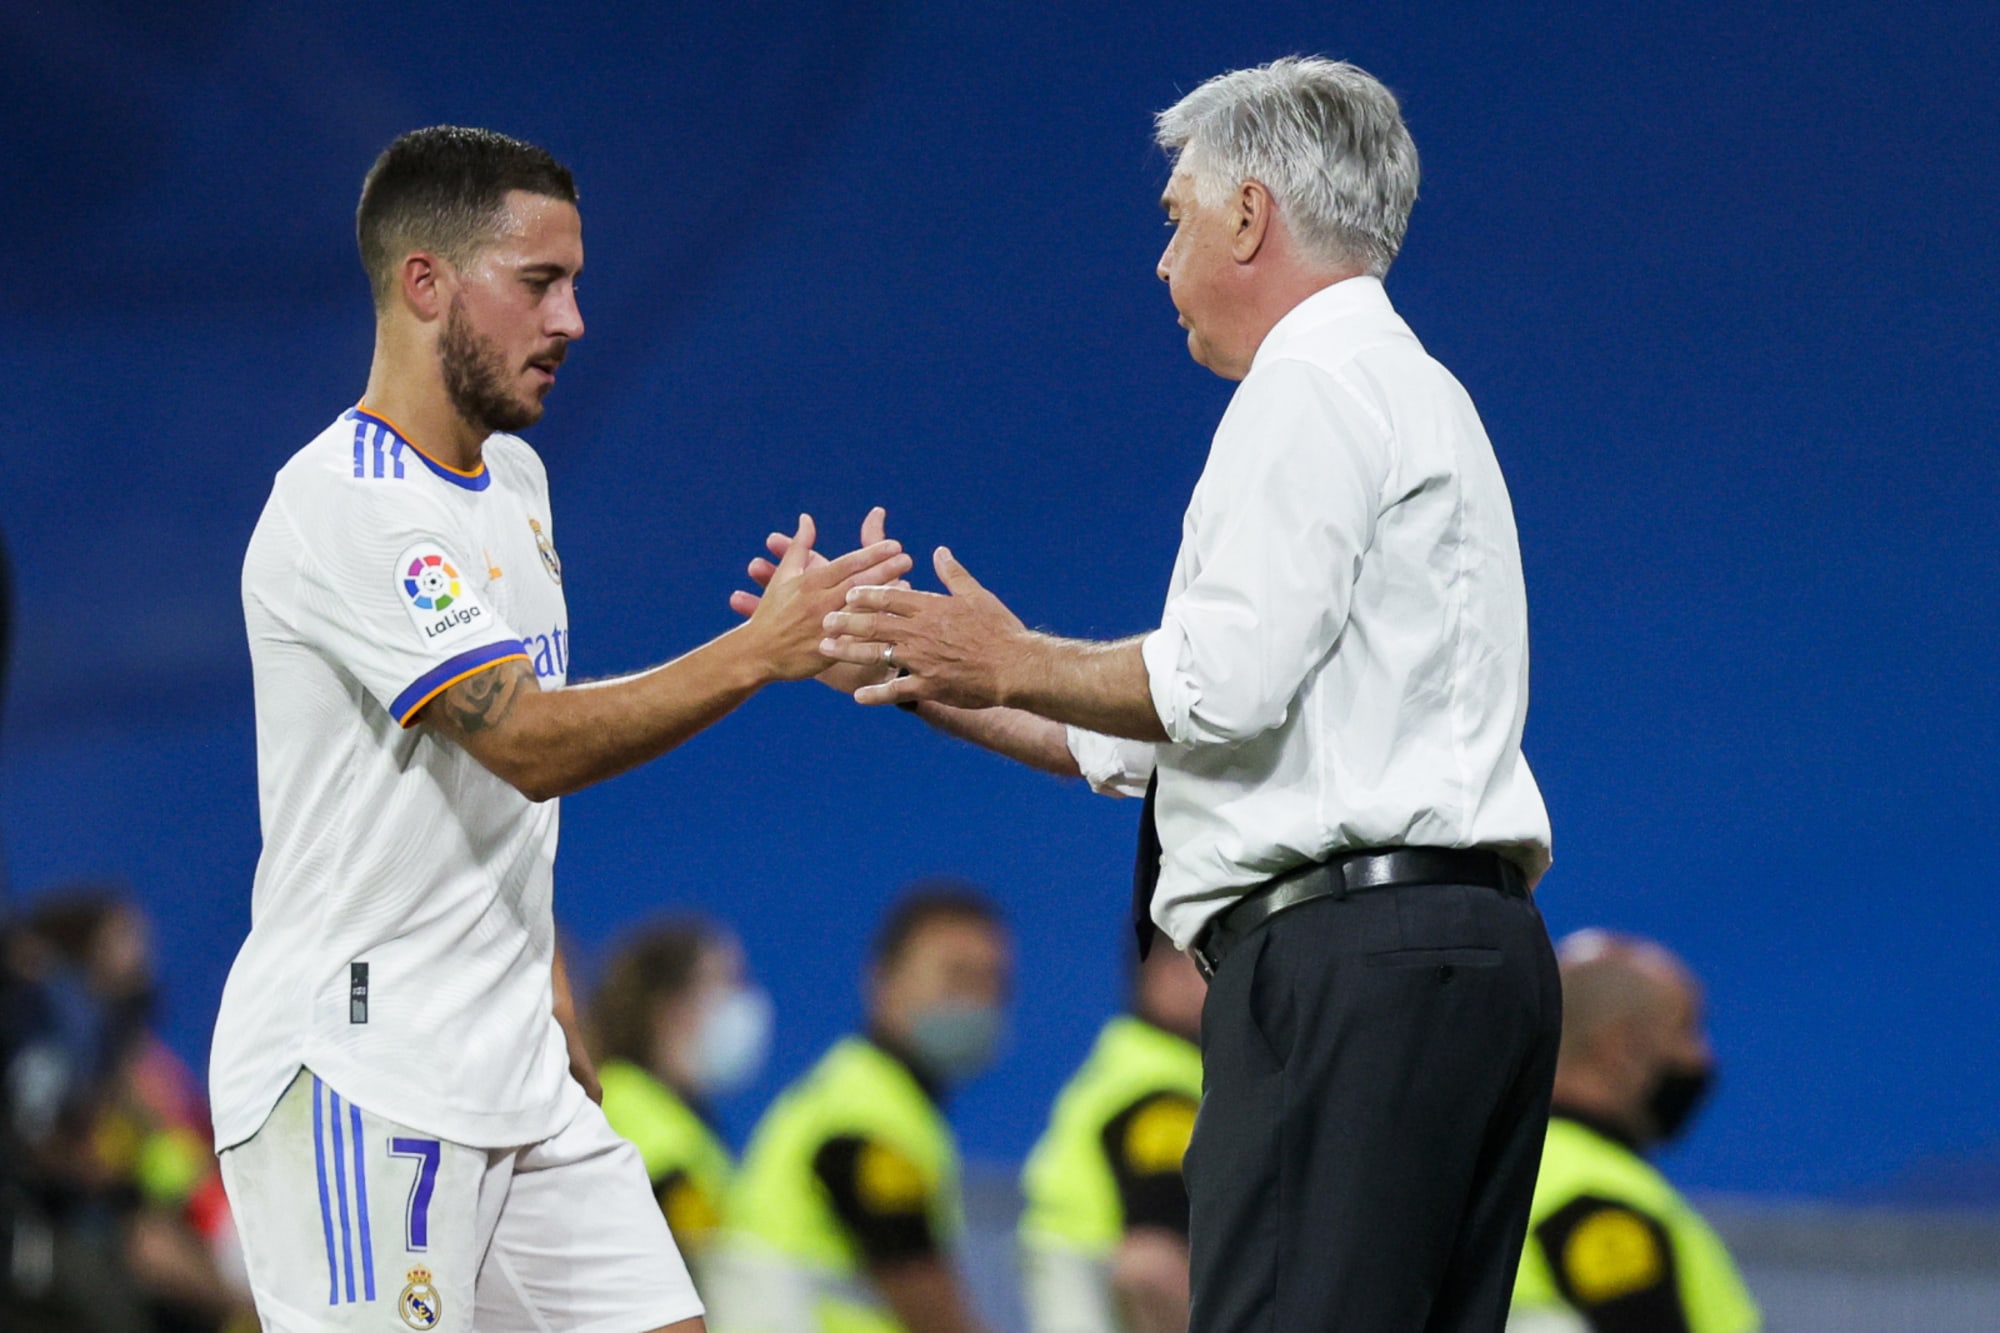 Eden Hazard opens up on fractured relationship with Carlo Ancelotti amid Real Madrid plight